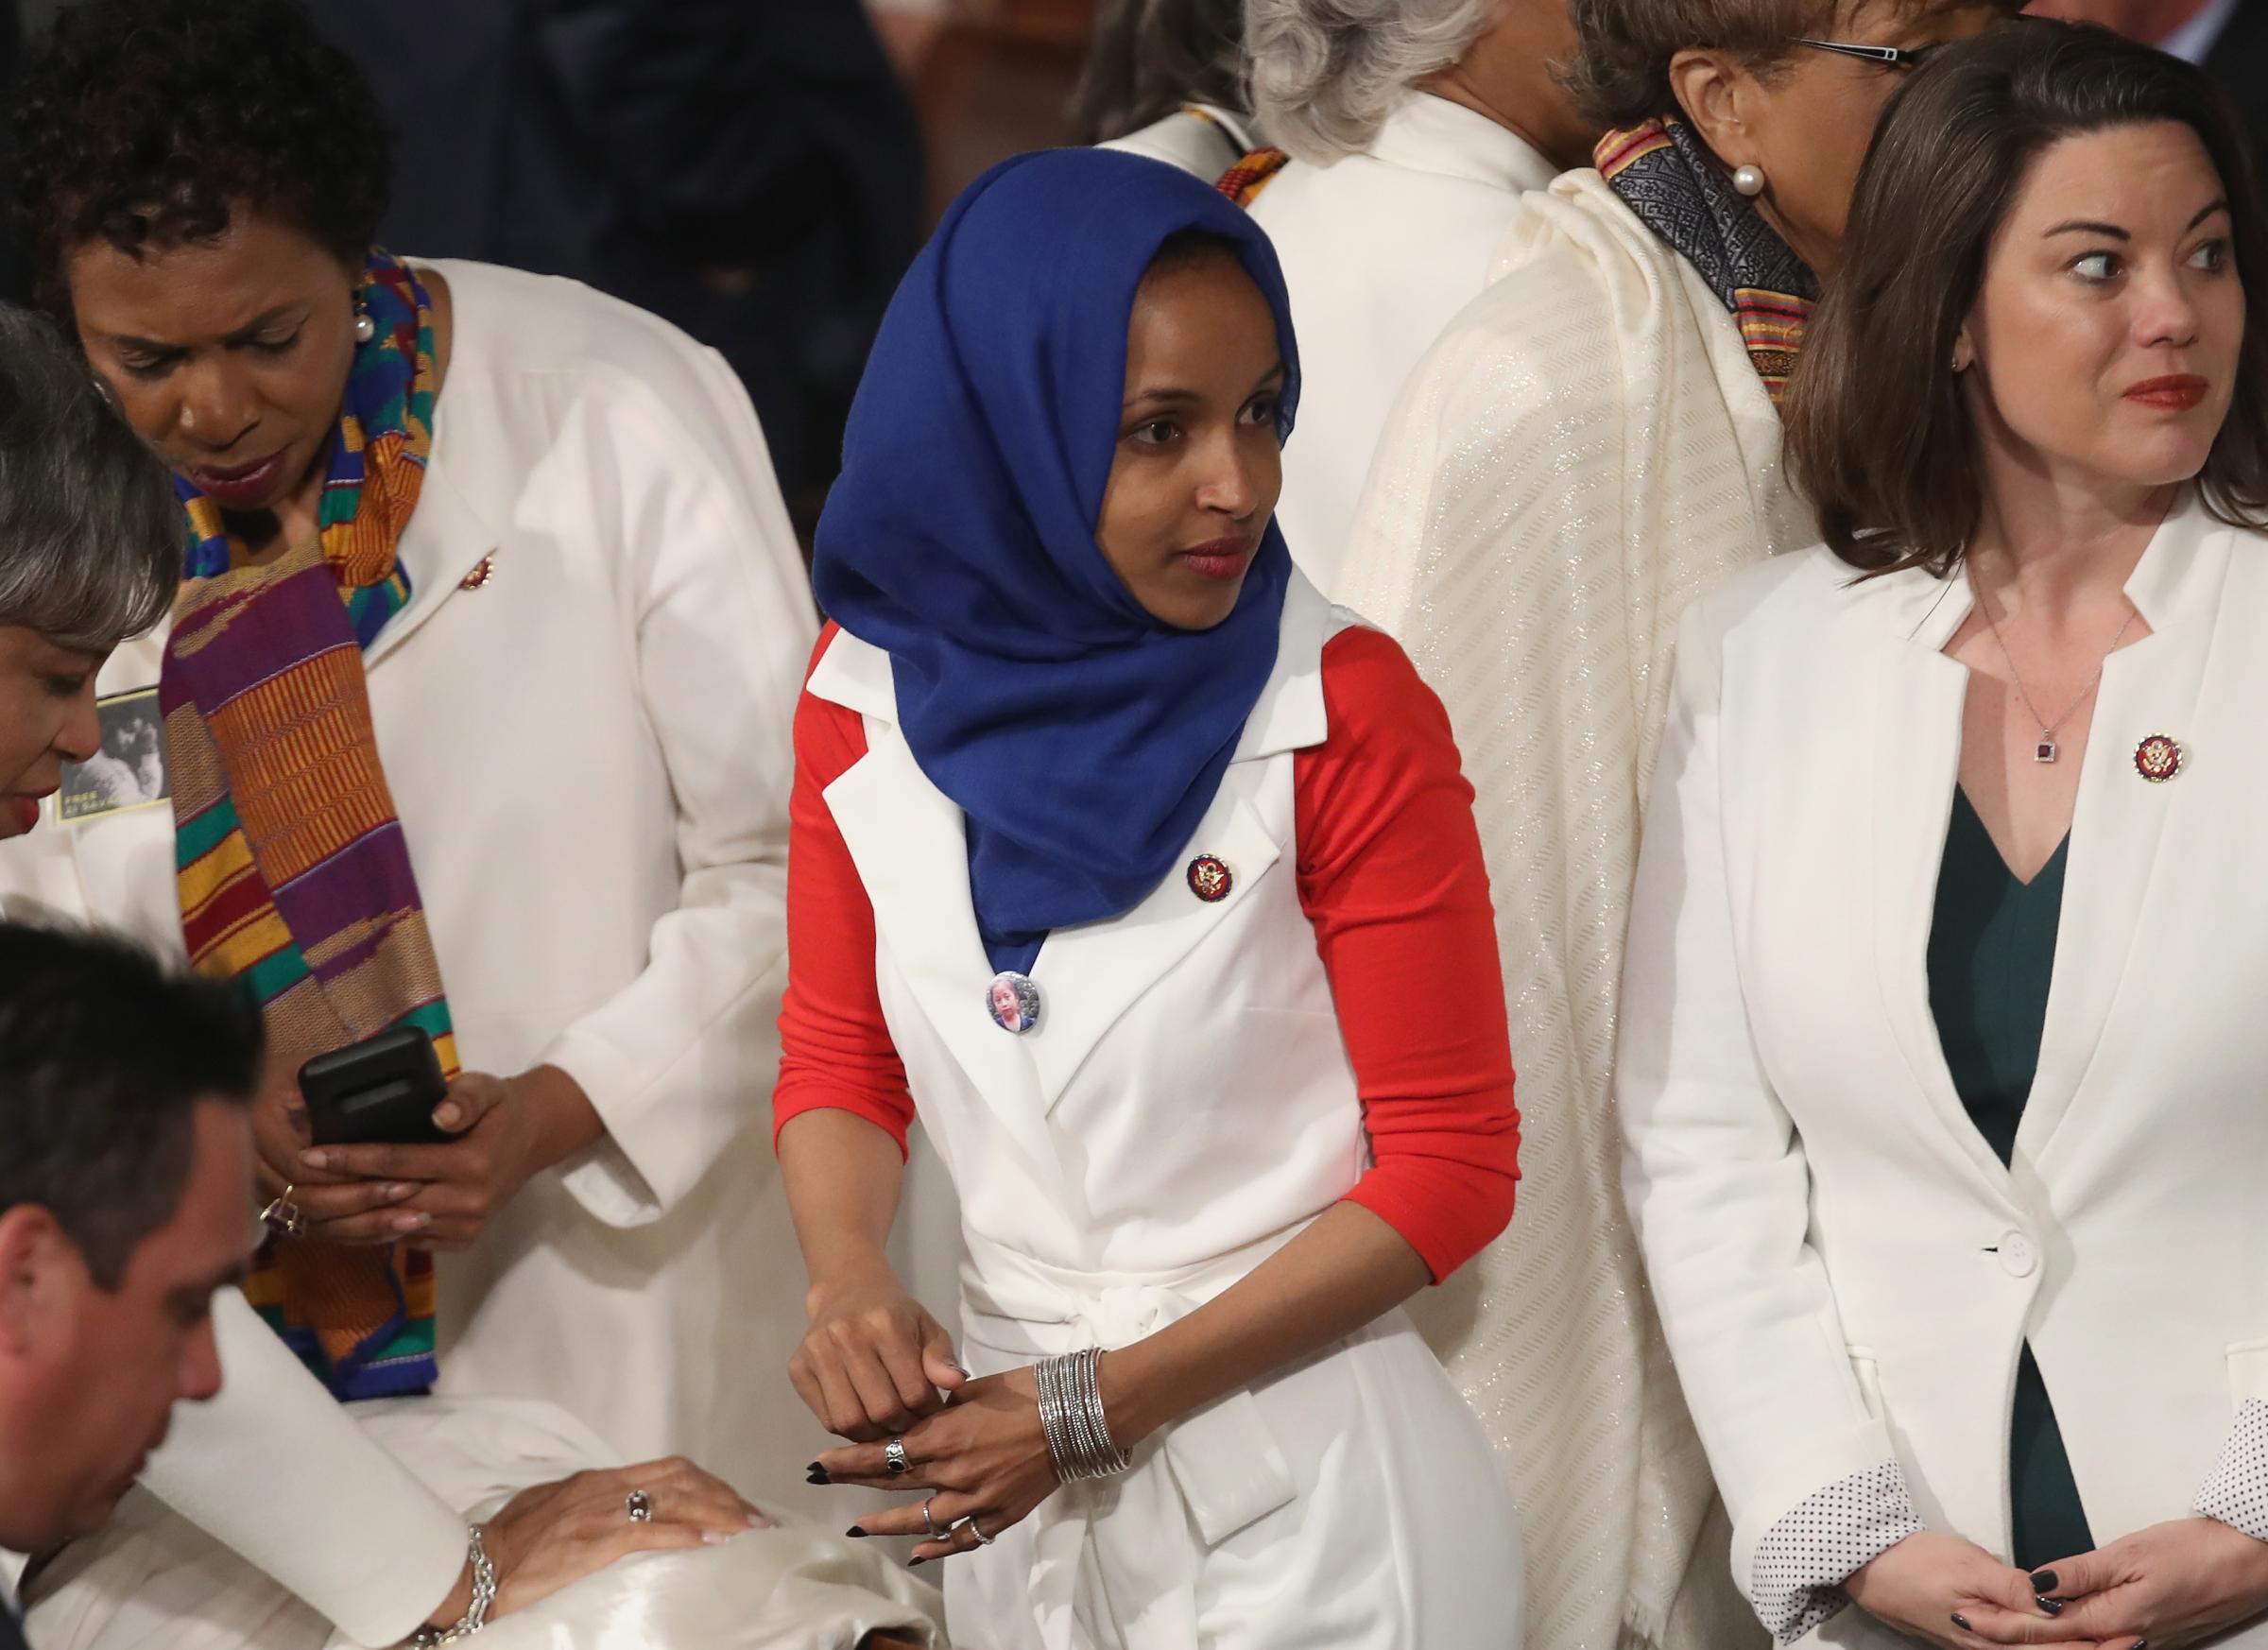 Omar at Trump 2019 State of the Union